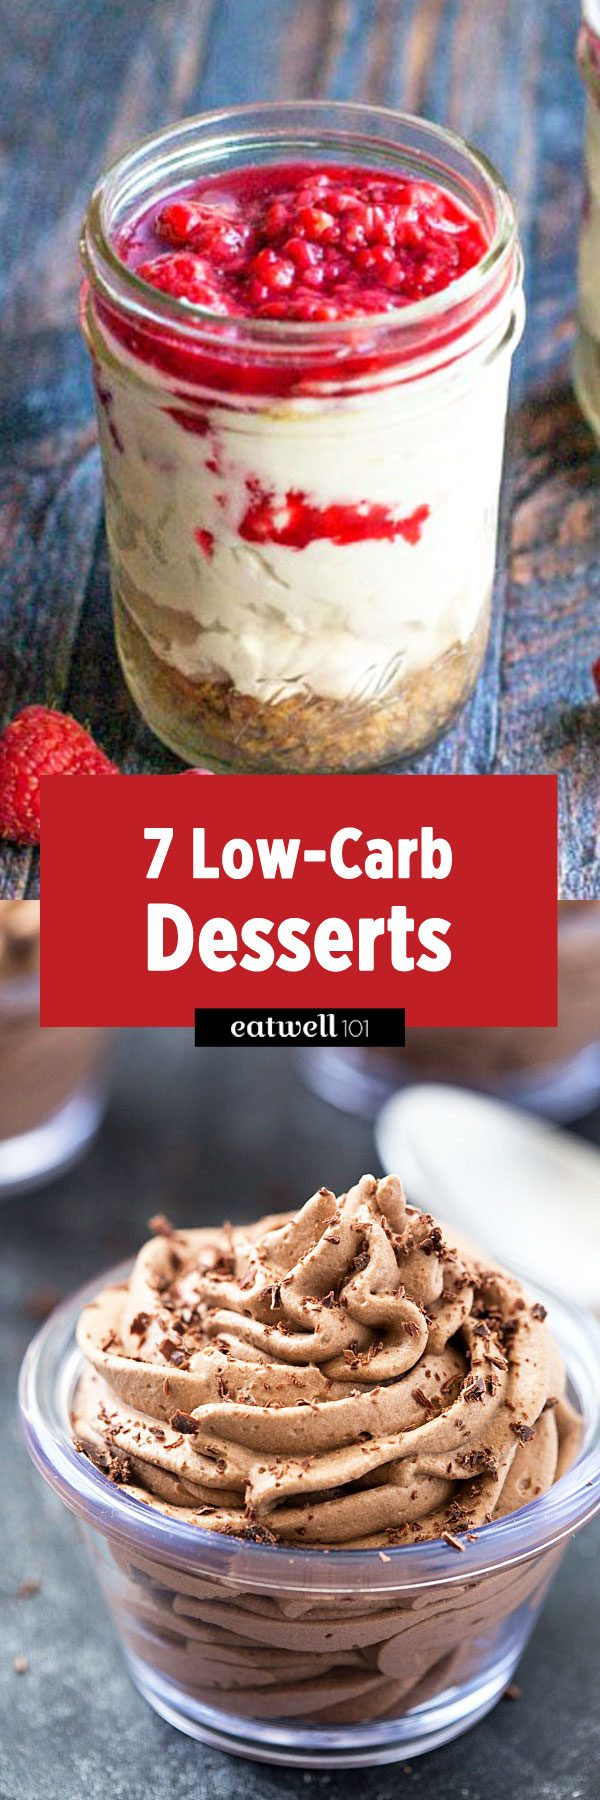 Low Carb Holiday Desserts
 Your Christmas Dessert Needs These Low Carb Treats